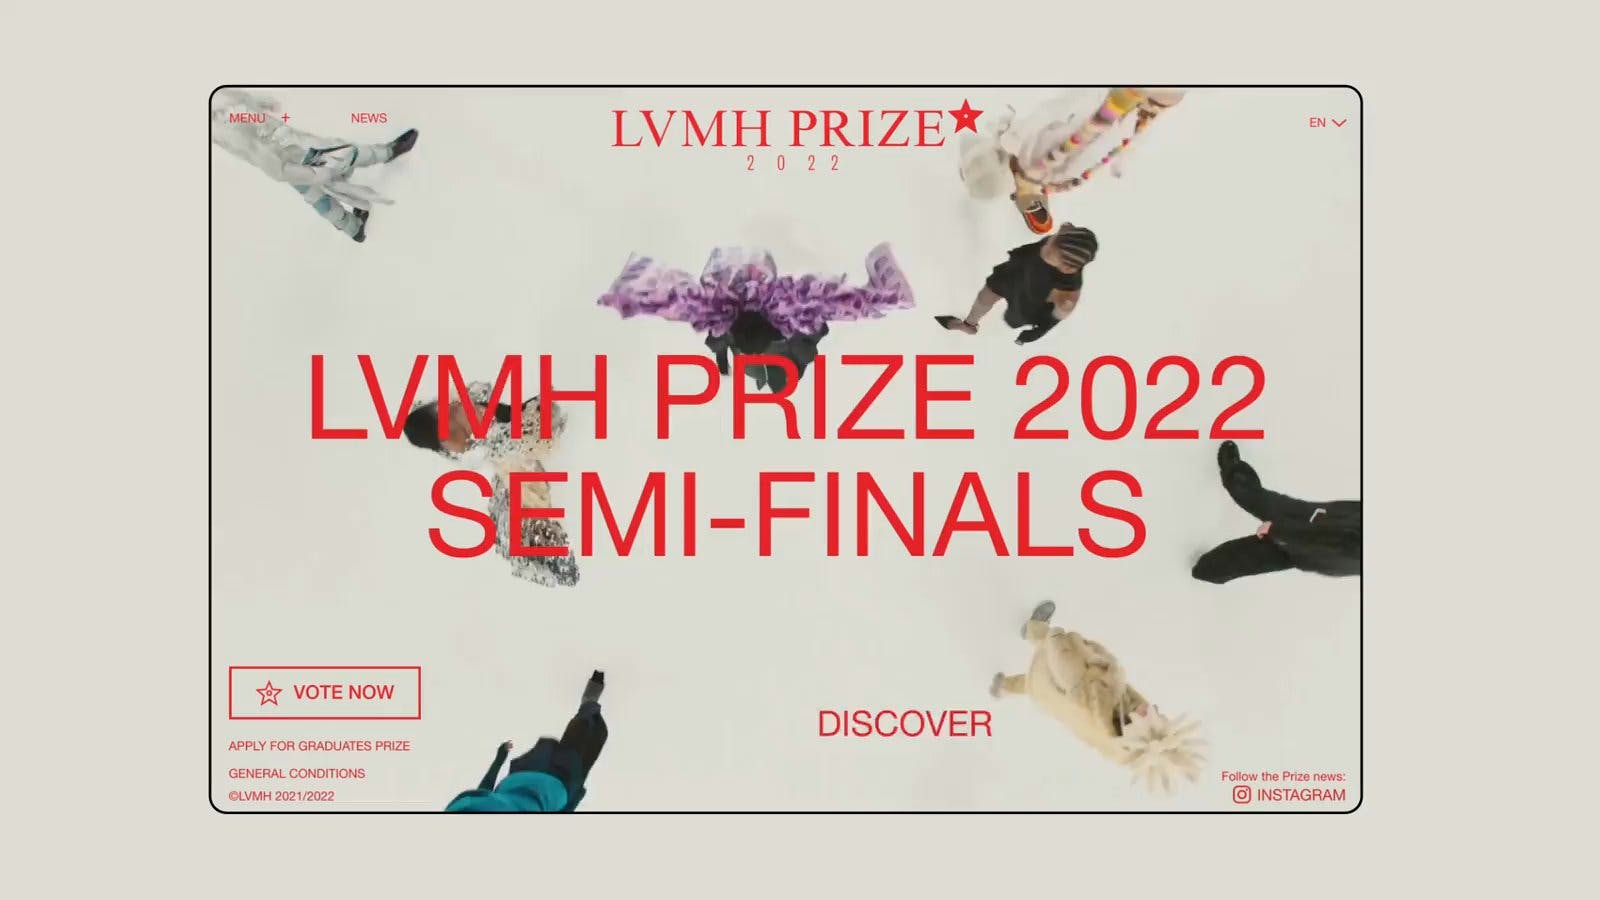 Semi-final of the 2021 LVMH Prize for young fashion